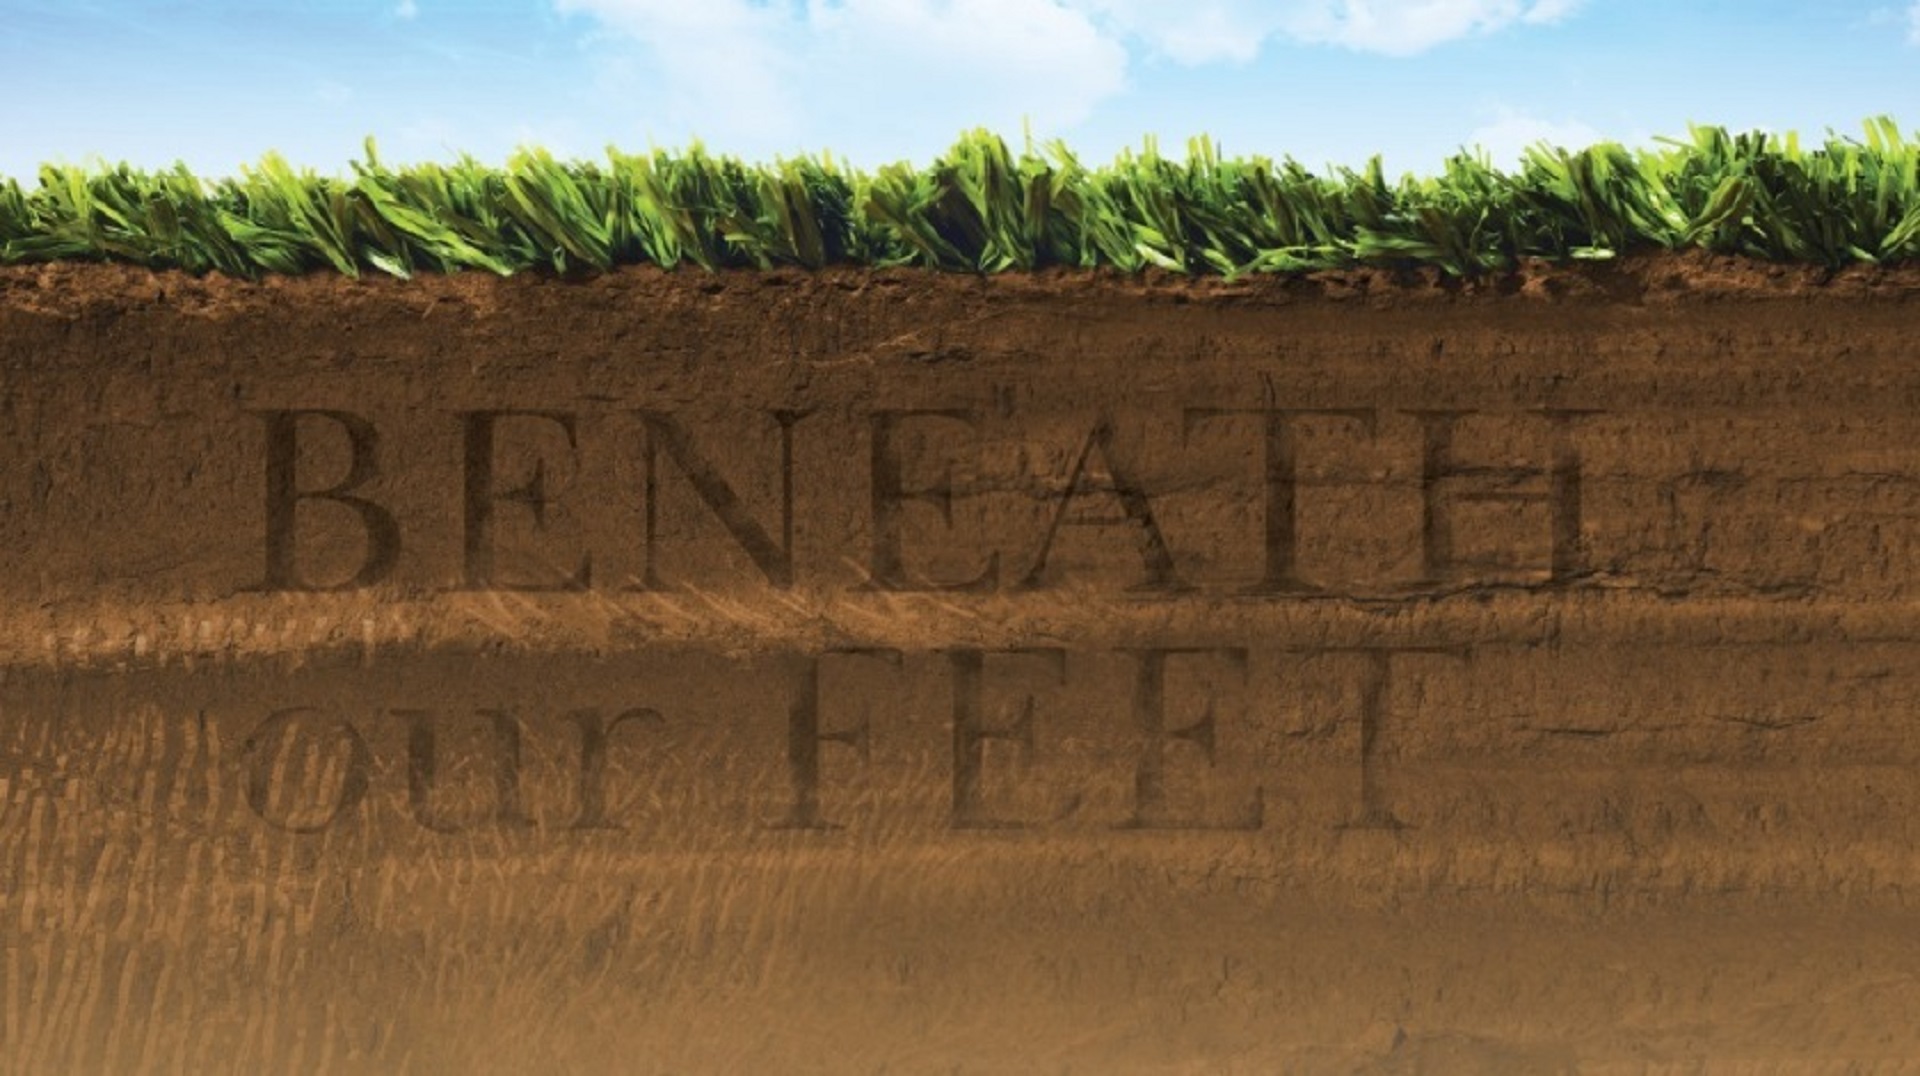 Image of the title from the Beneath our Feet exhibition